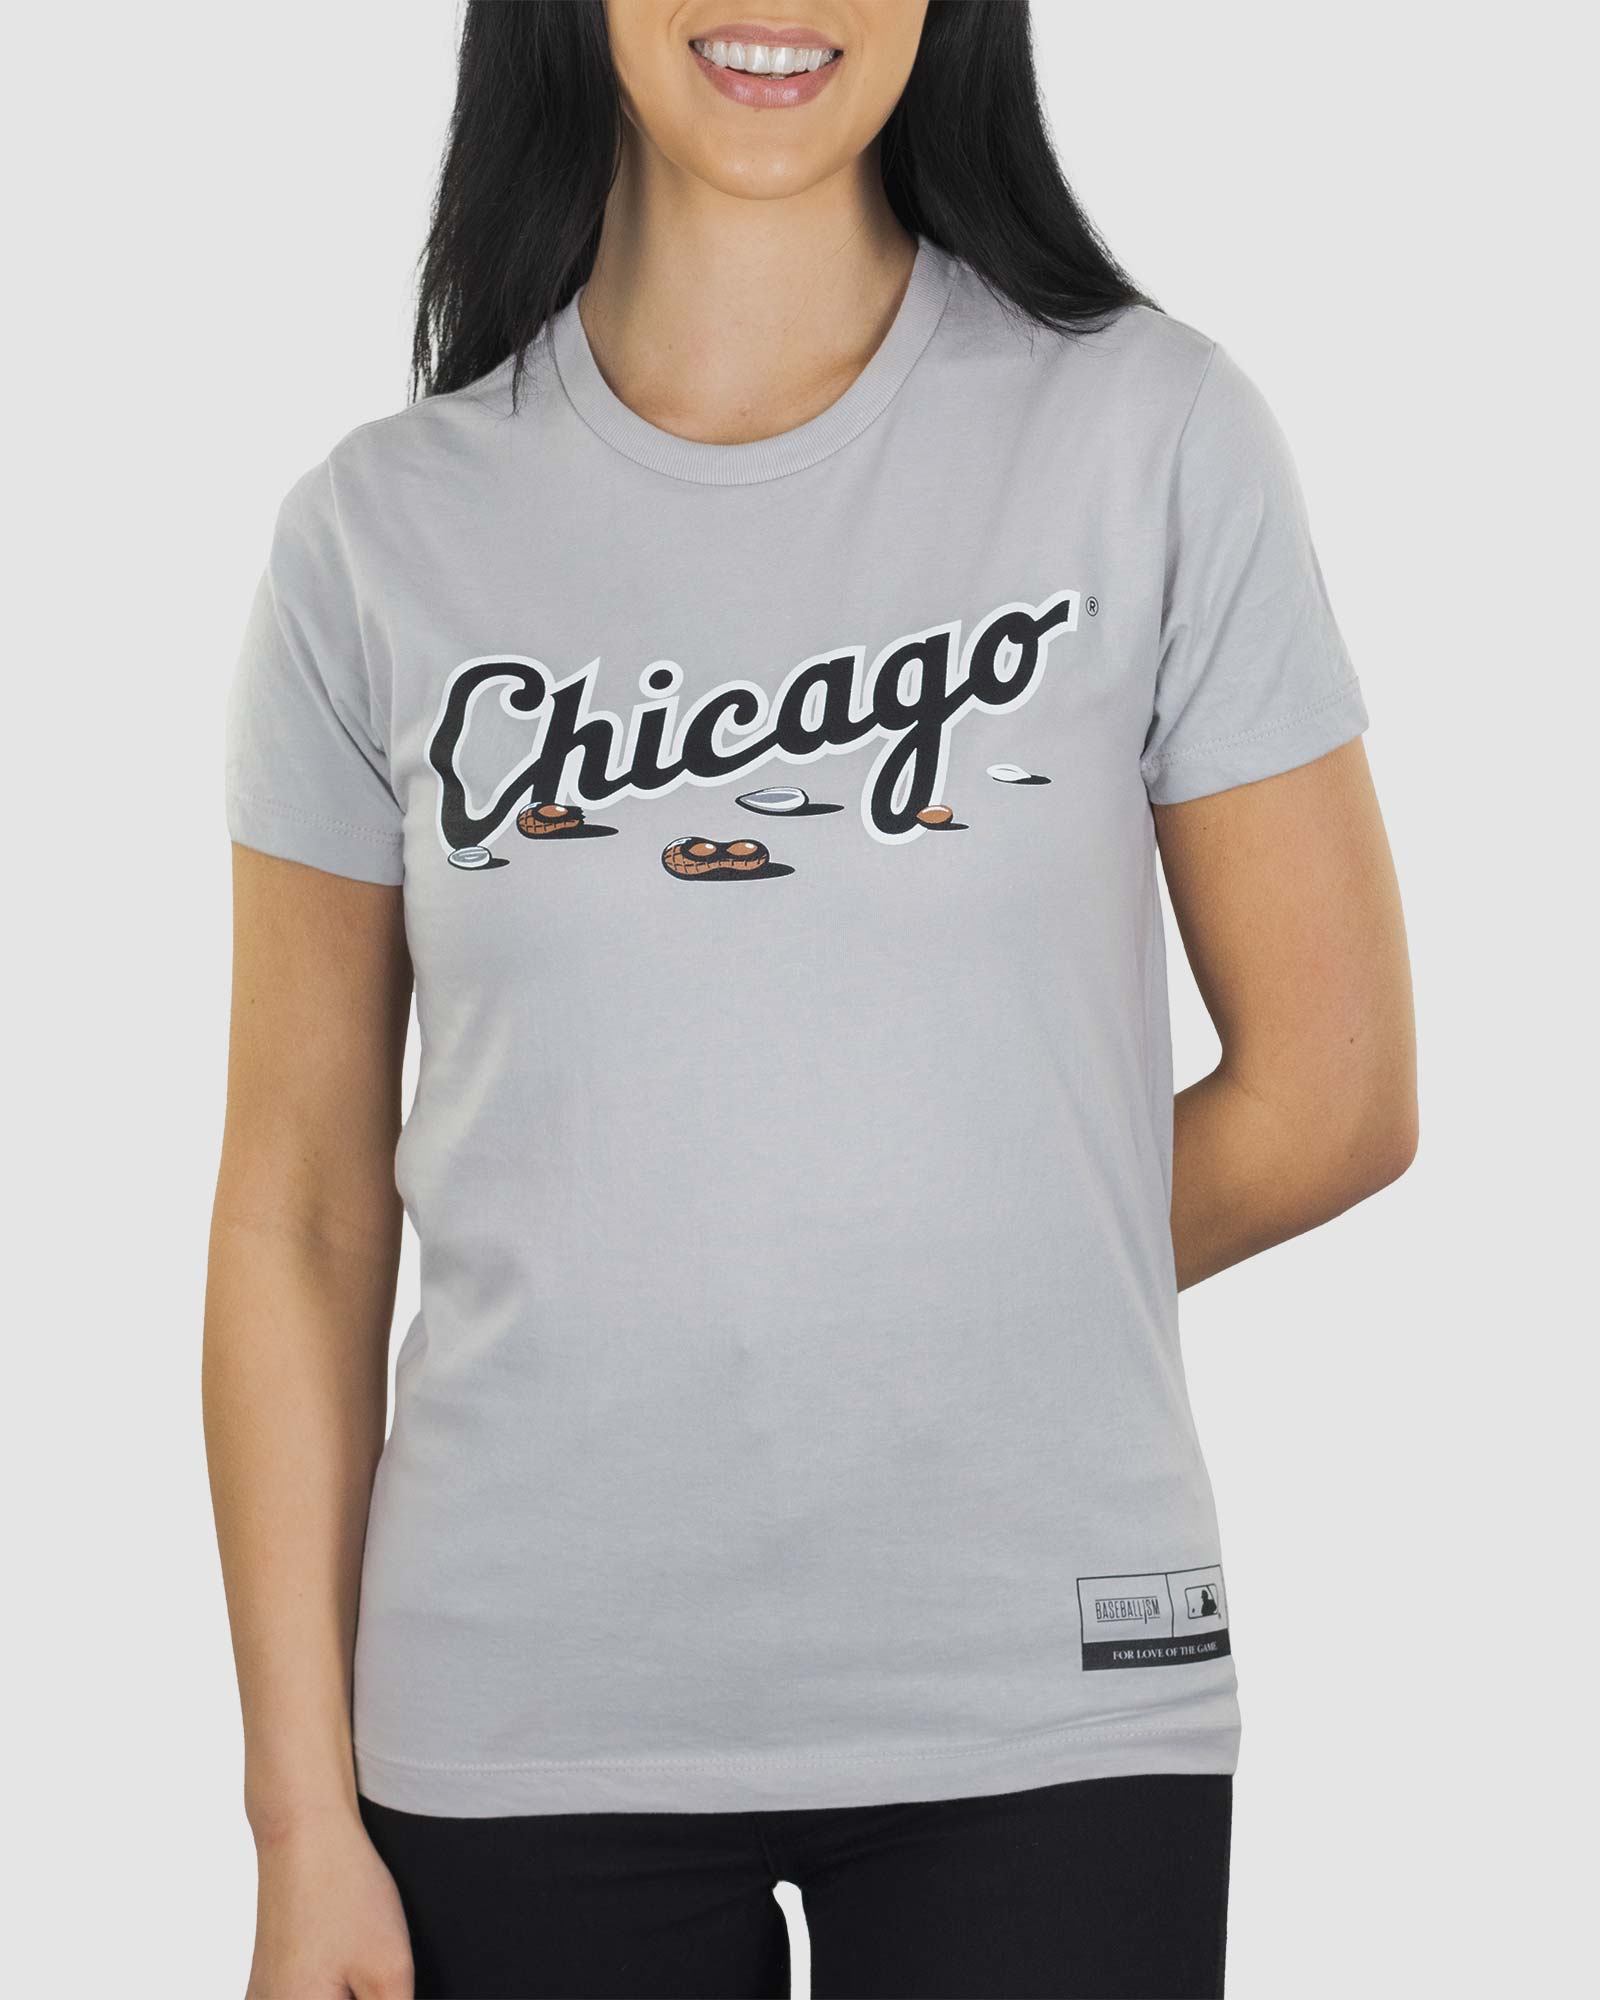 Baseballism Get Your Peanuts! Women's Warm-Up Tee - Chicago White Sox Large